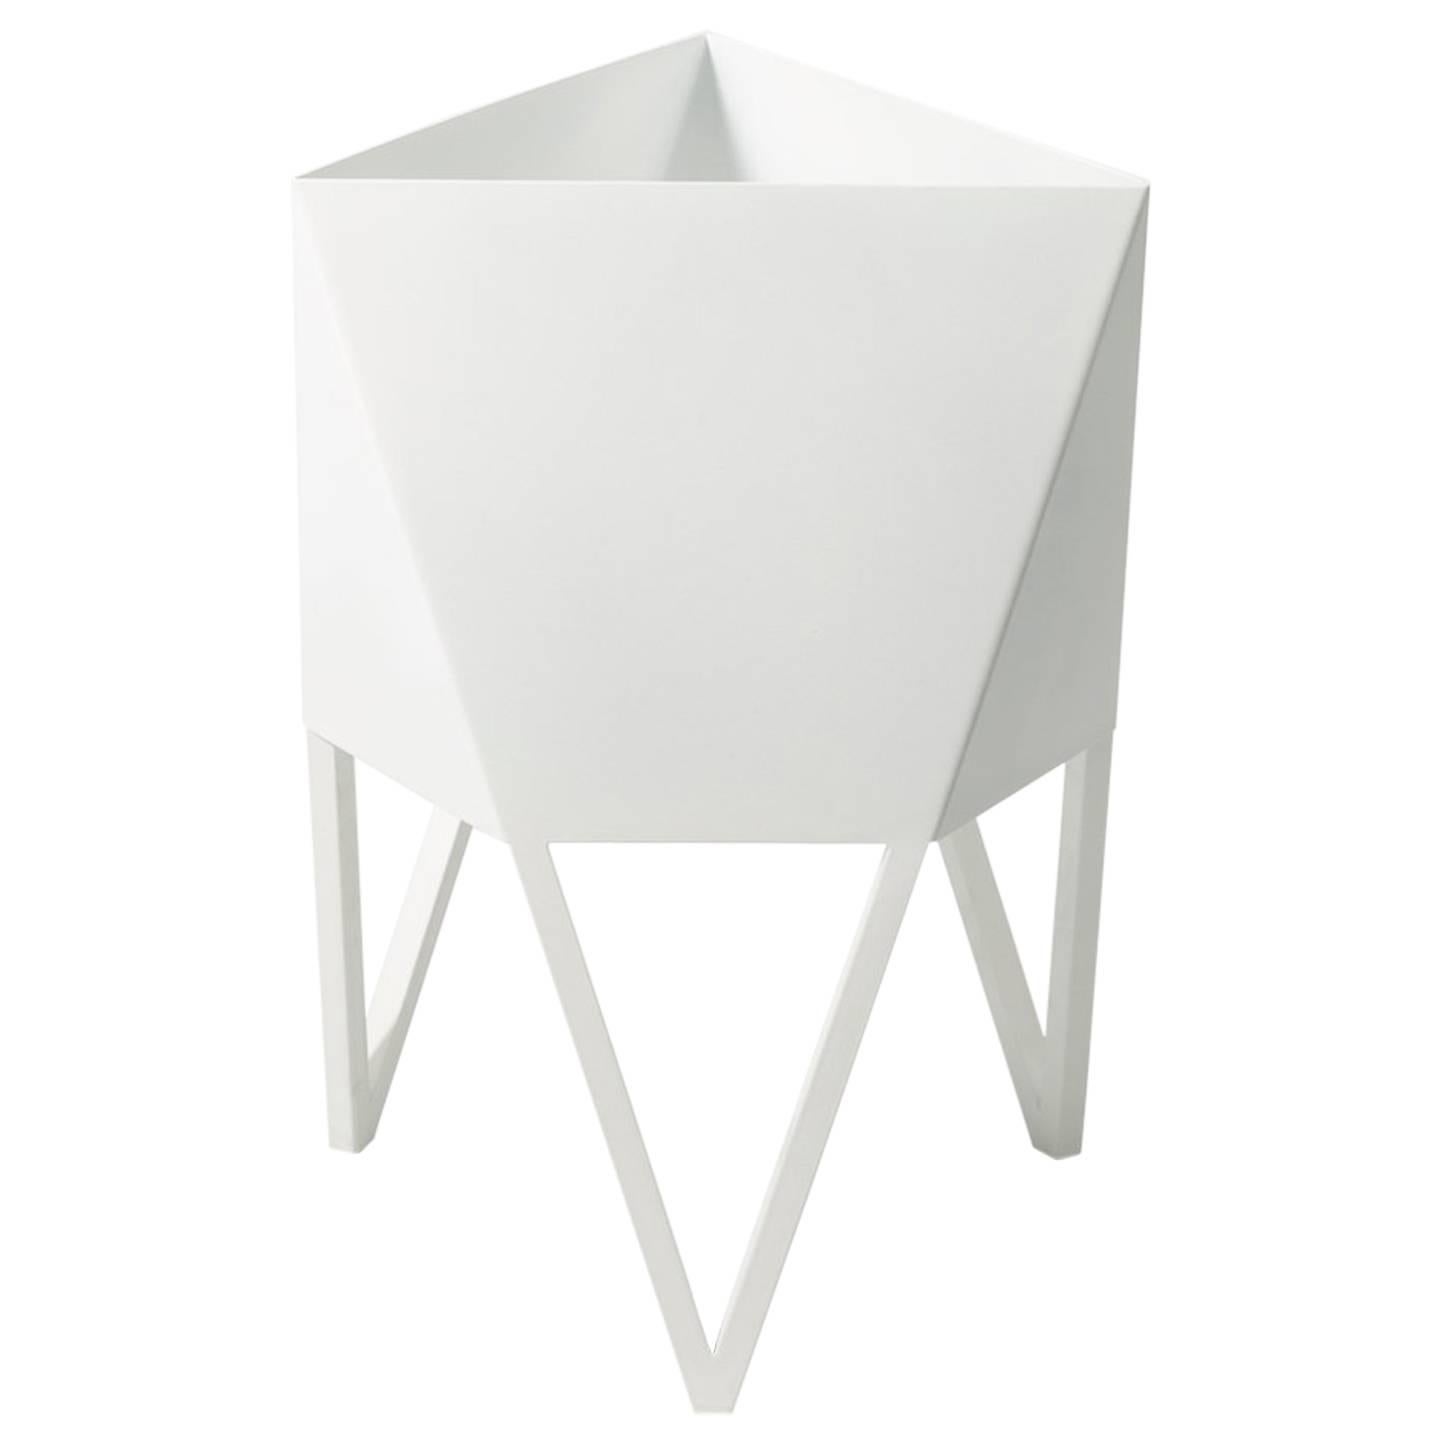 Deca Planter in Glossy White Steel, Small, by Force/Collide